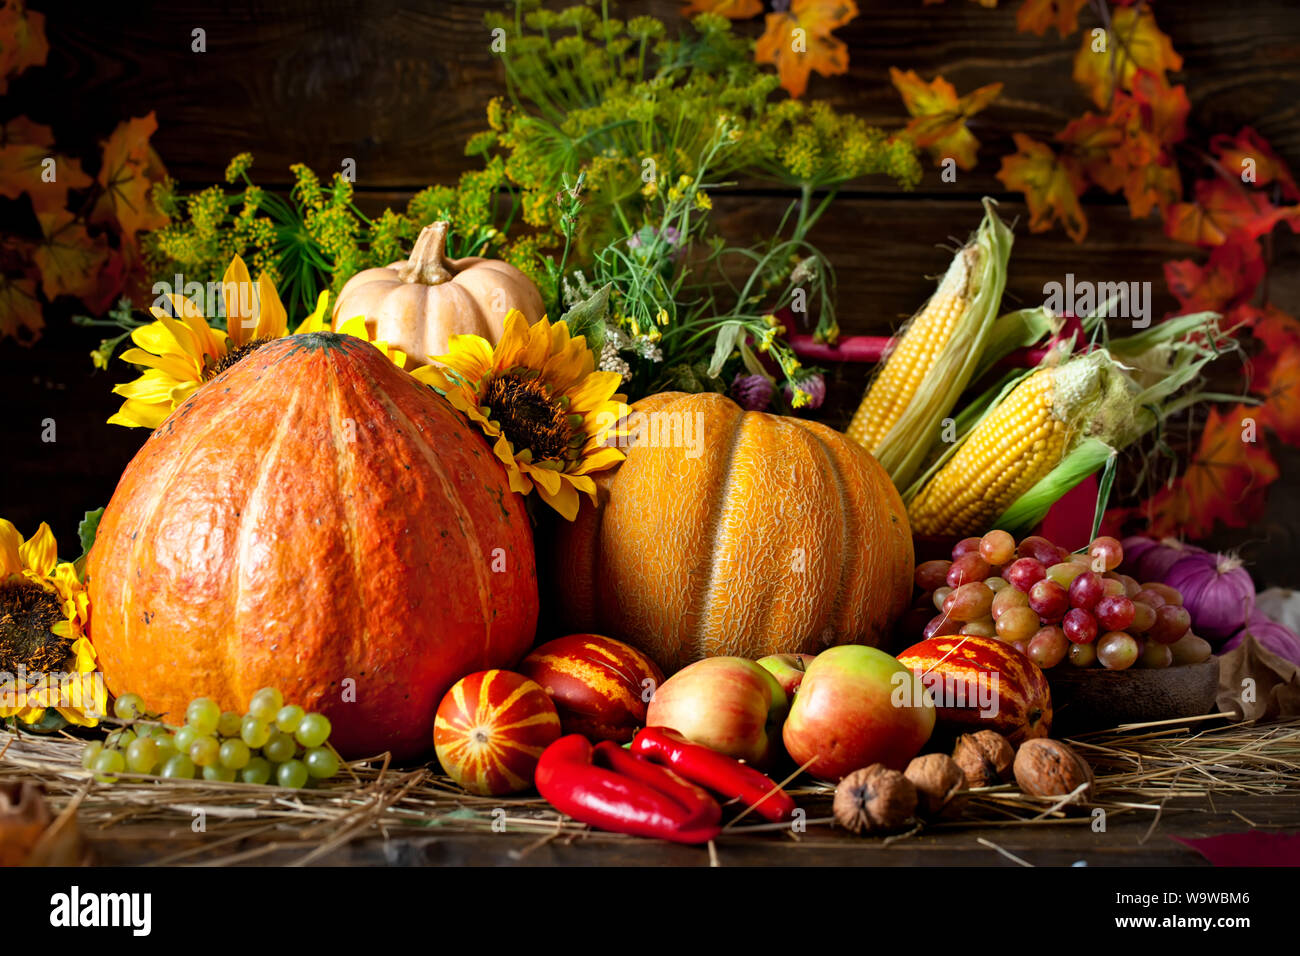 A Harvest of Thanksgiving